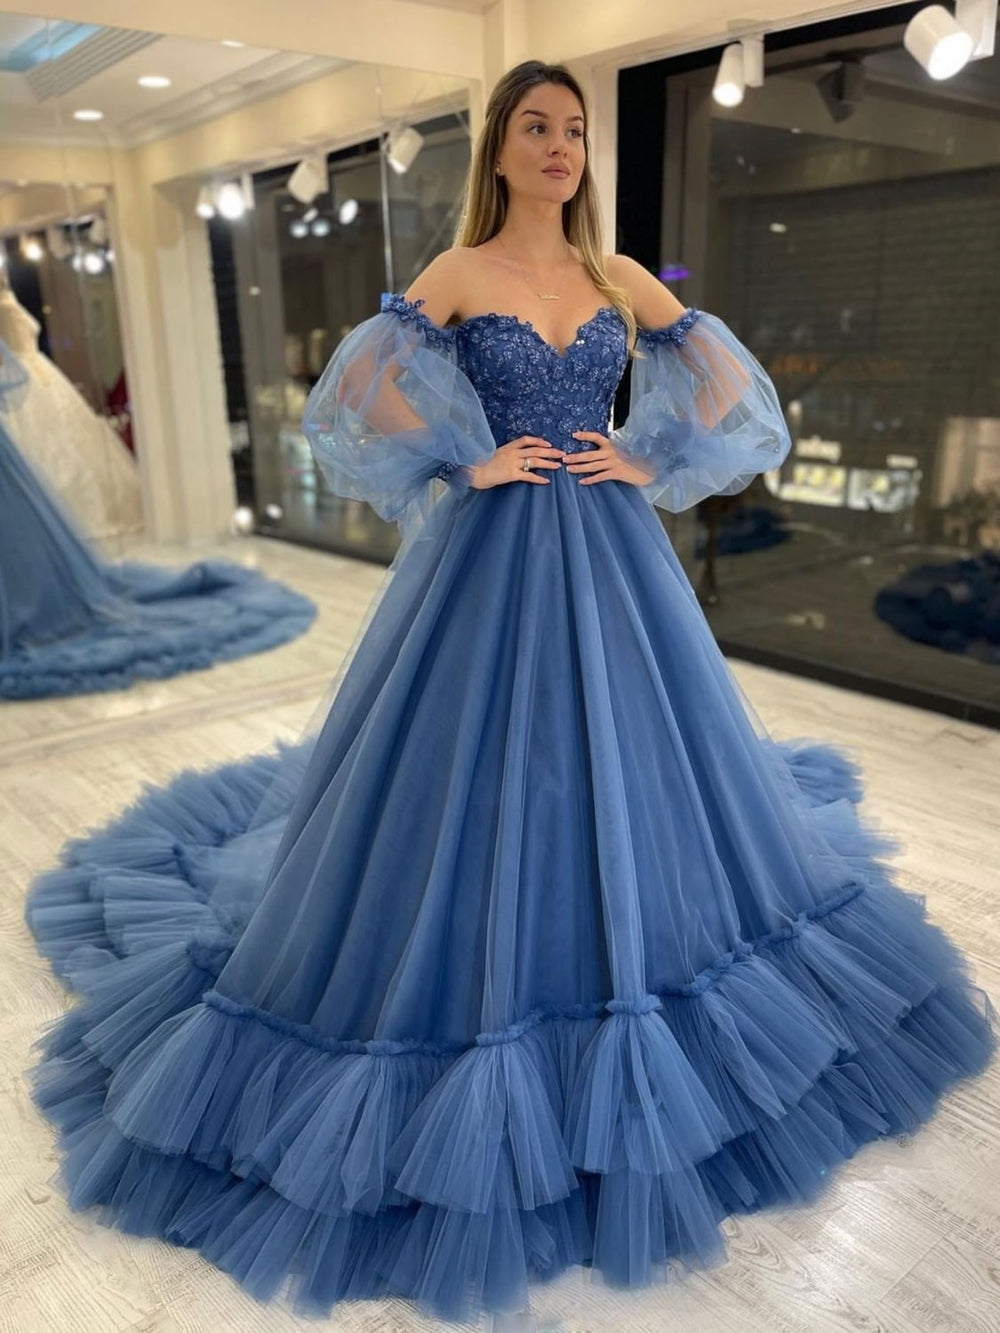 Women Tulle Prom Dress Off Shoulder Puff Sleeve Wedding Party Gown Fairy |  eBay